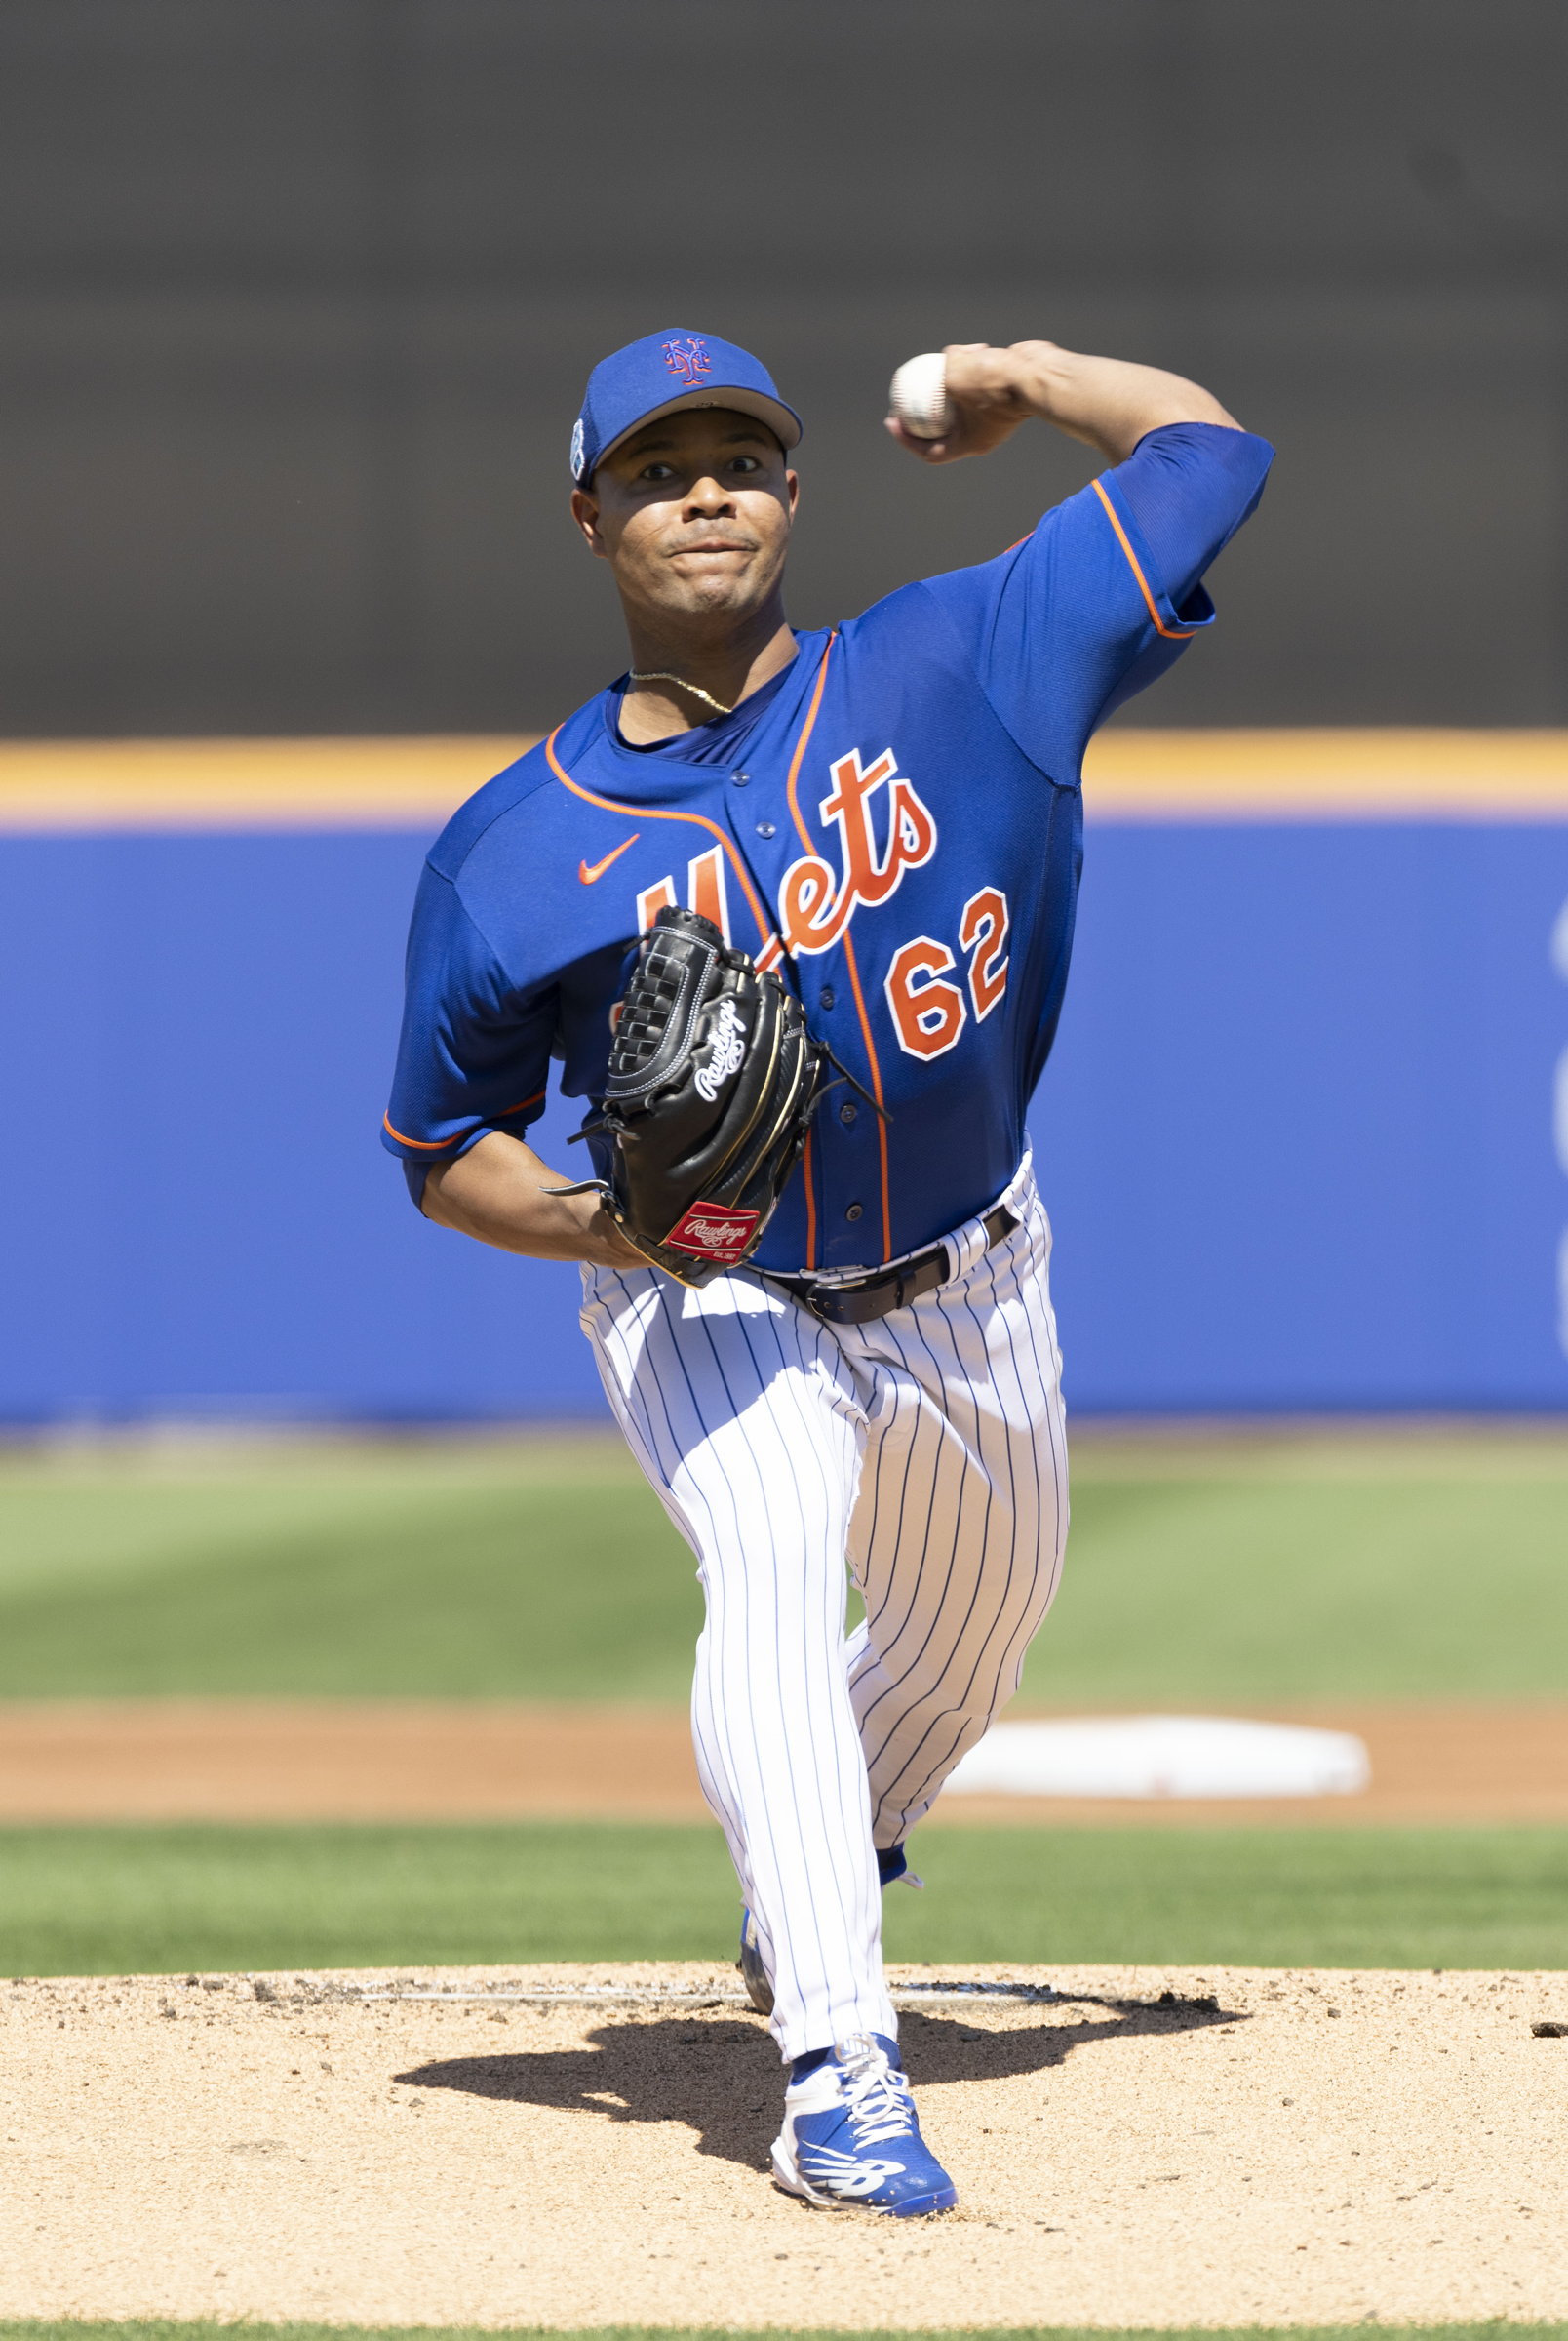 New York Mets pitcher Jose Quintana pitching during spring training game